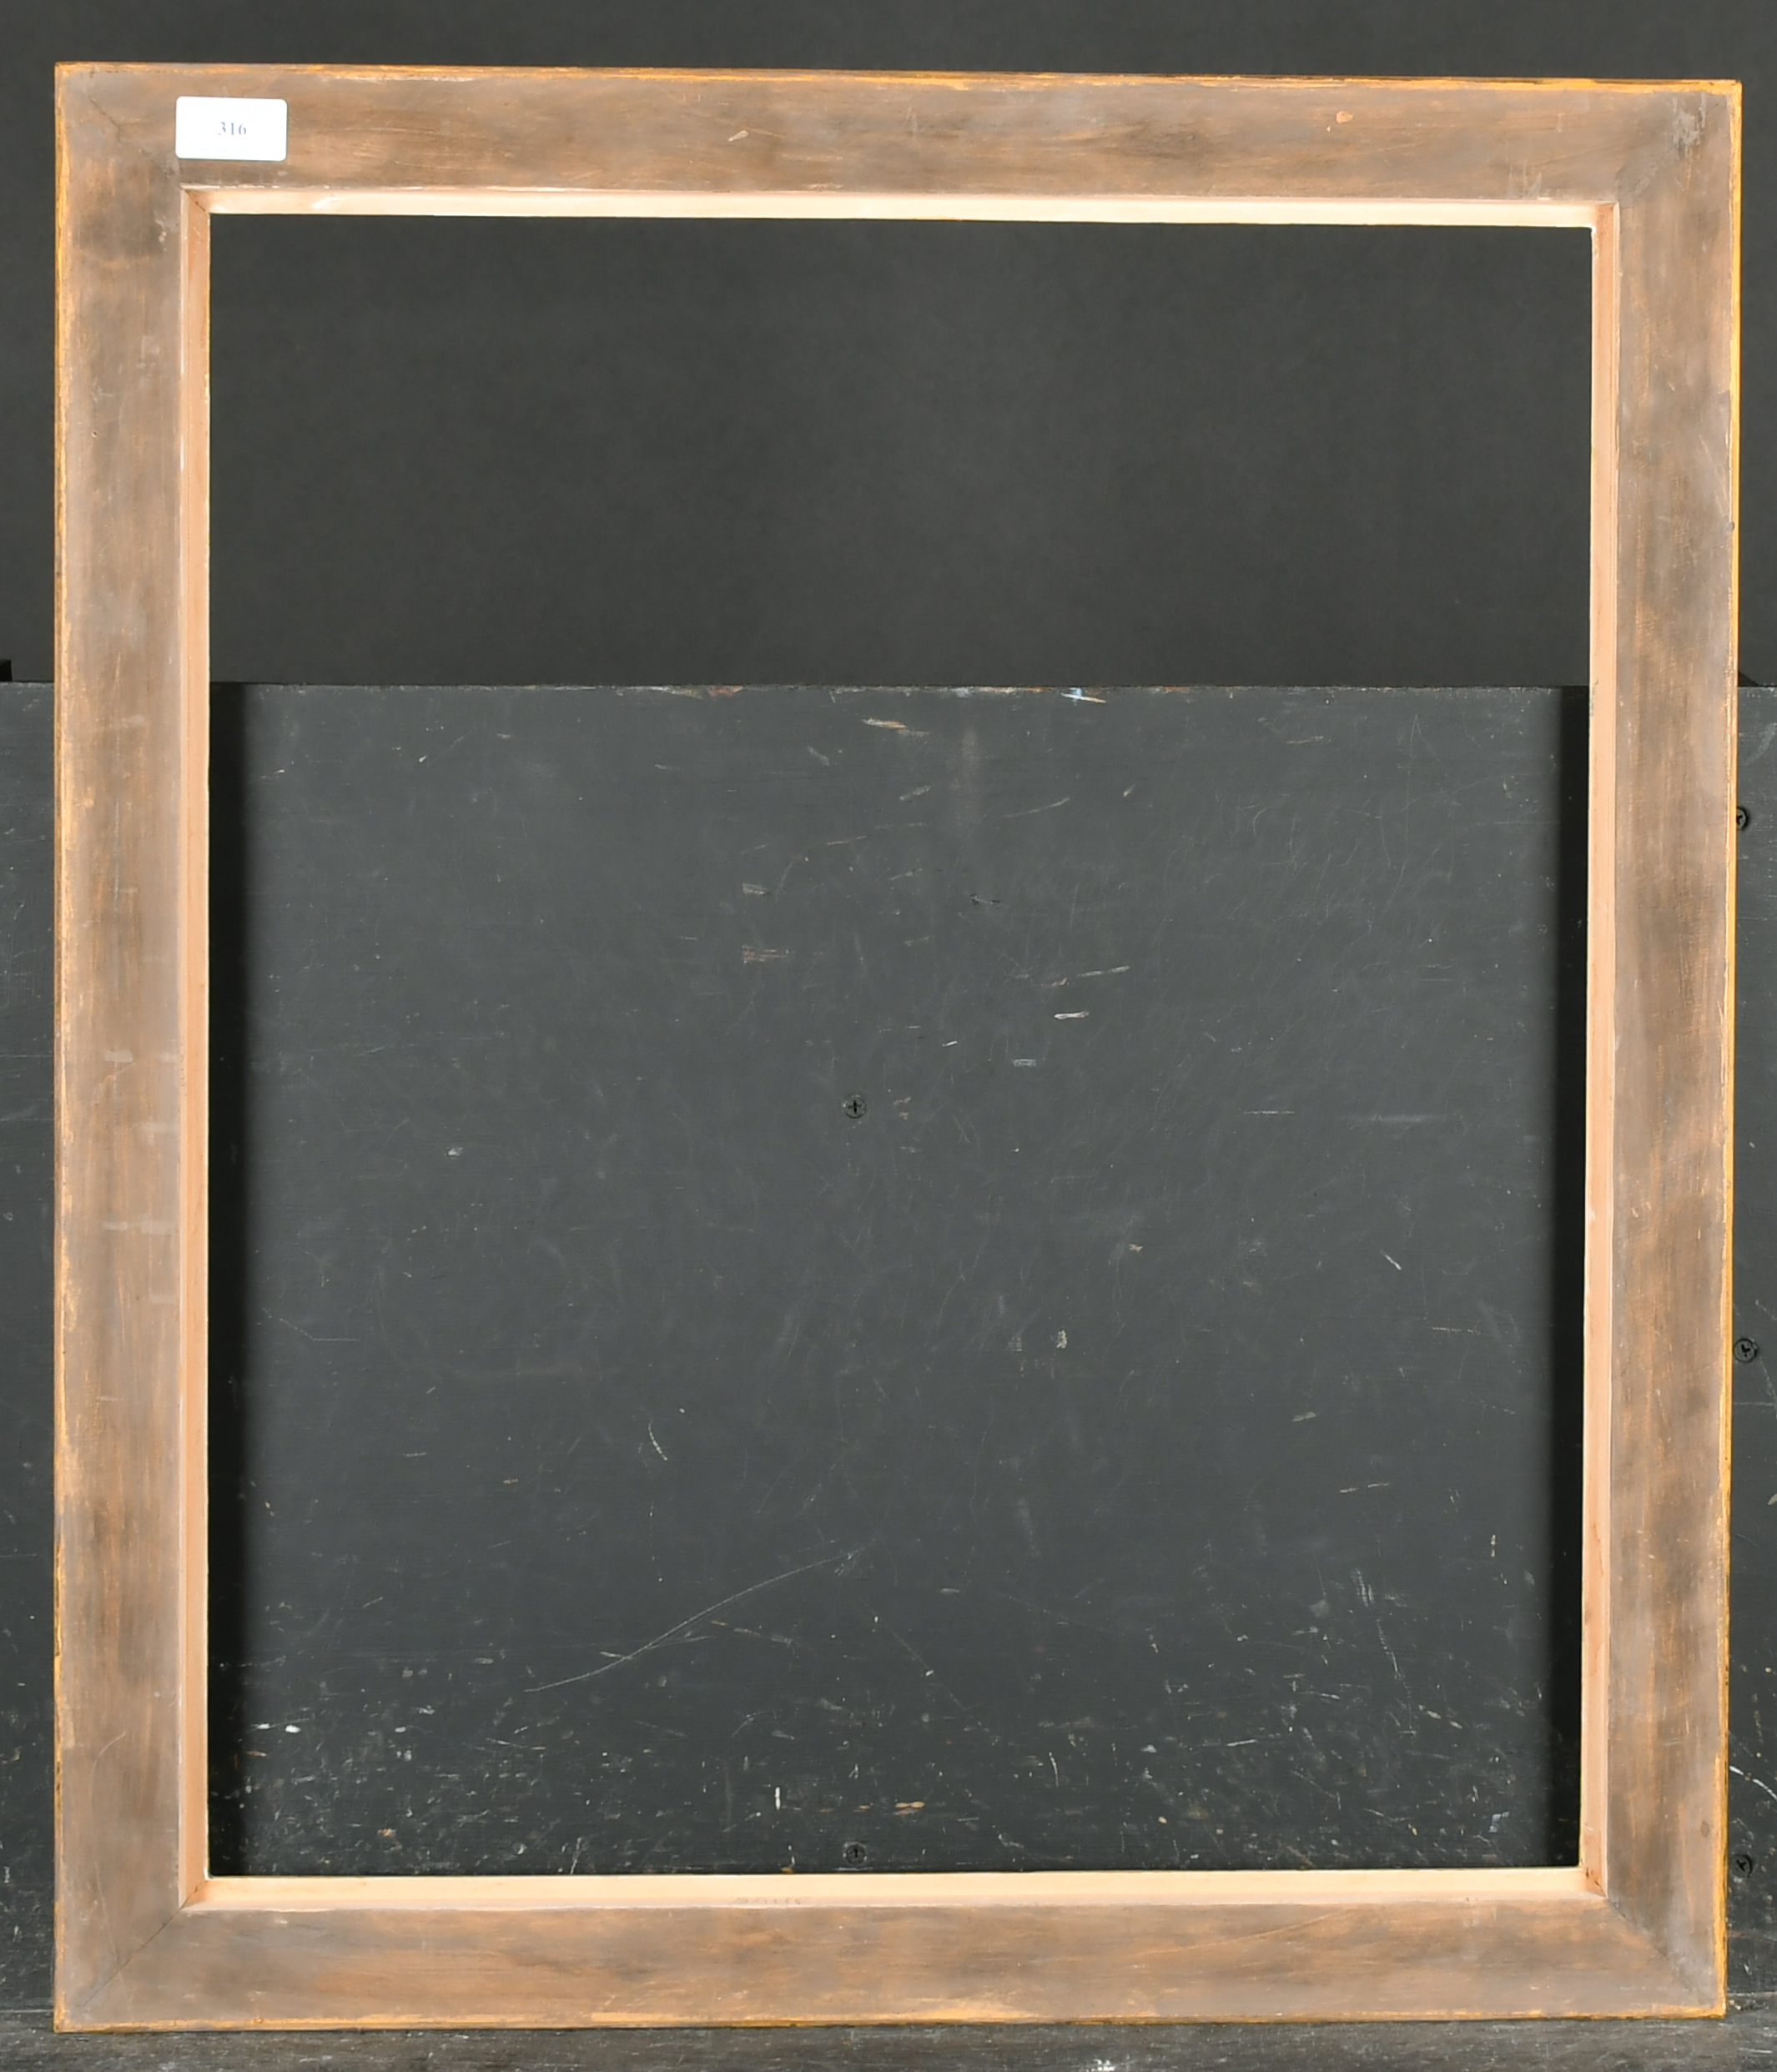 Alexander G Ley & Son. A Reproduction French Baguette Frame, rebate 24" x 20" (61 x 50.8cm) - Image 3 of 3